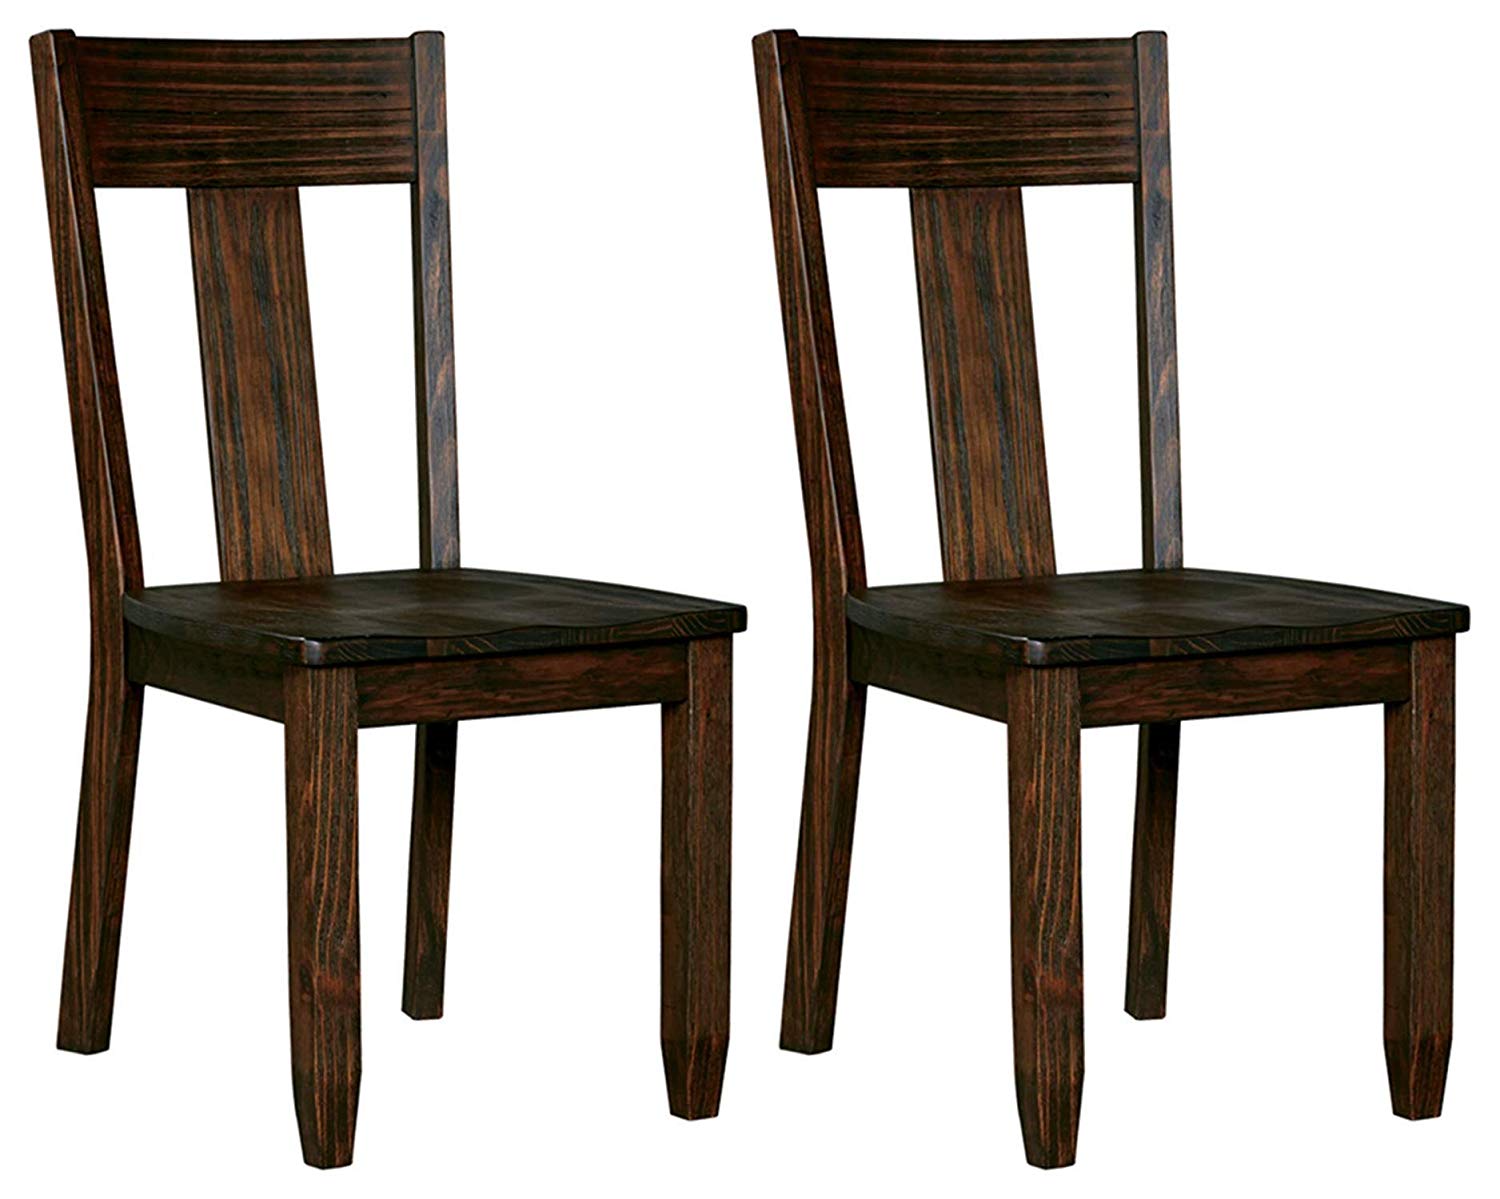 Ashely Furniture Signature Design- Trudell Dining Room Chair- 100% Pine Wood- Set of 2 – Dark brown